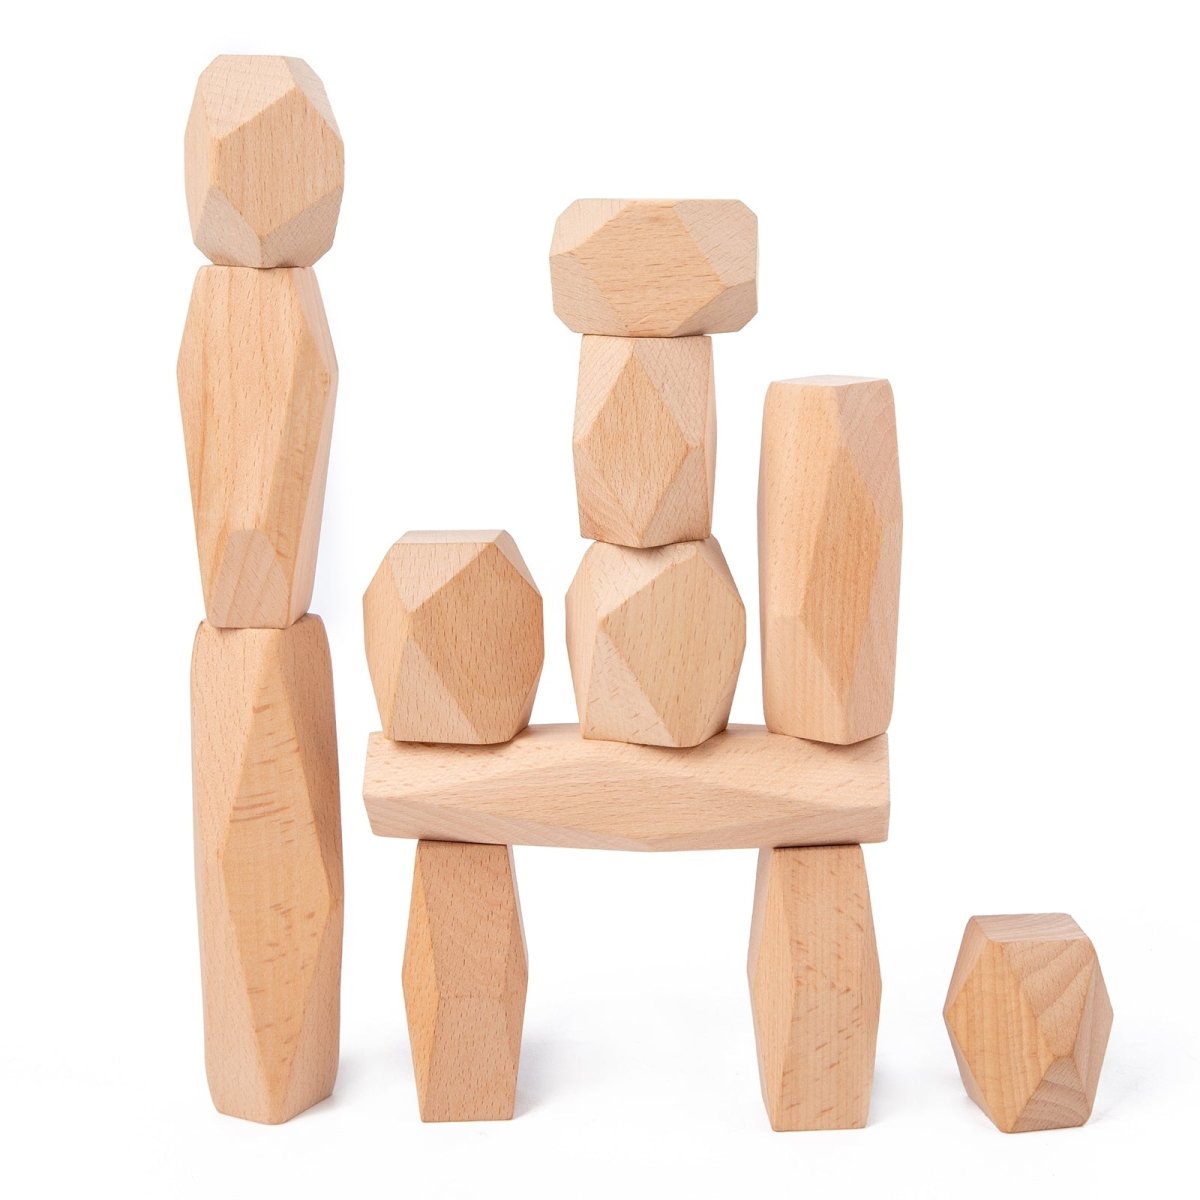 Jumbo Wooden Stacking Stones - Jumbo Wooden Stacking Stones - Curious Melodies